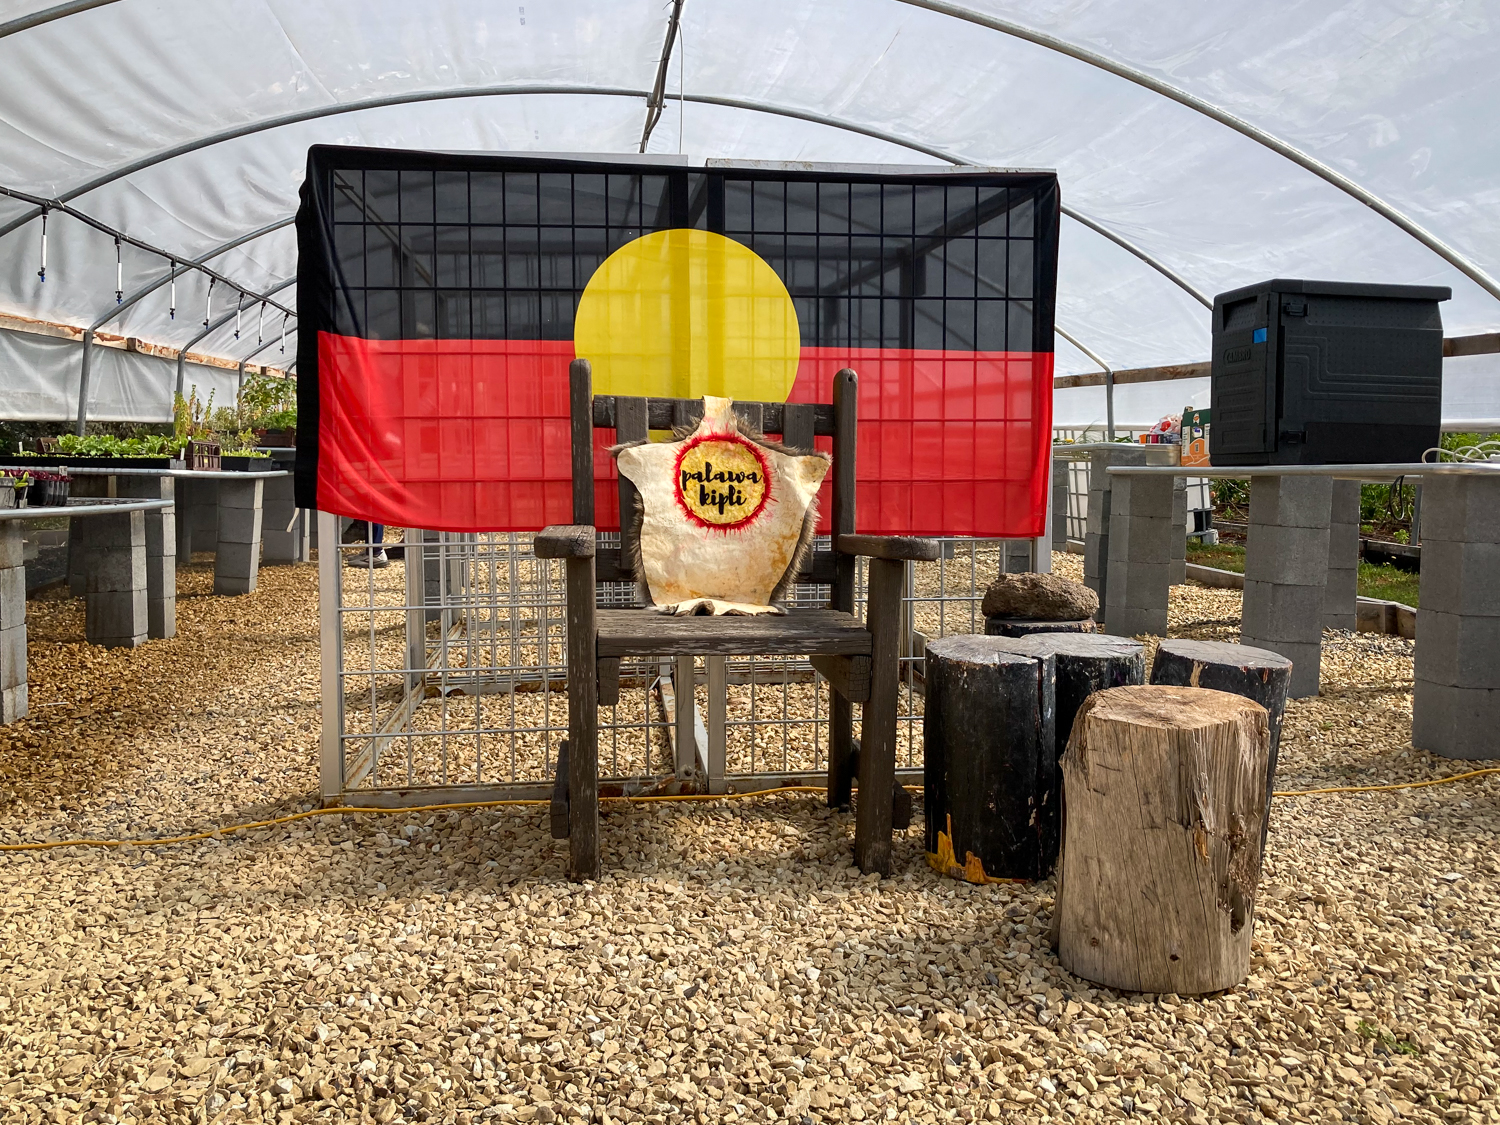 A woodenchair draped with an animal skin and a plaque with the words "palawa kipli" in front of an Aboriginal flag inside a poly tunnel